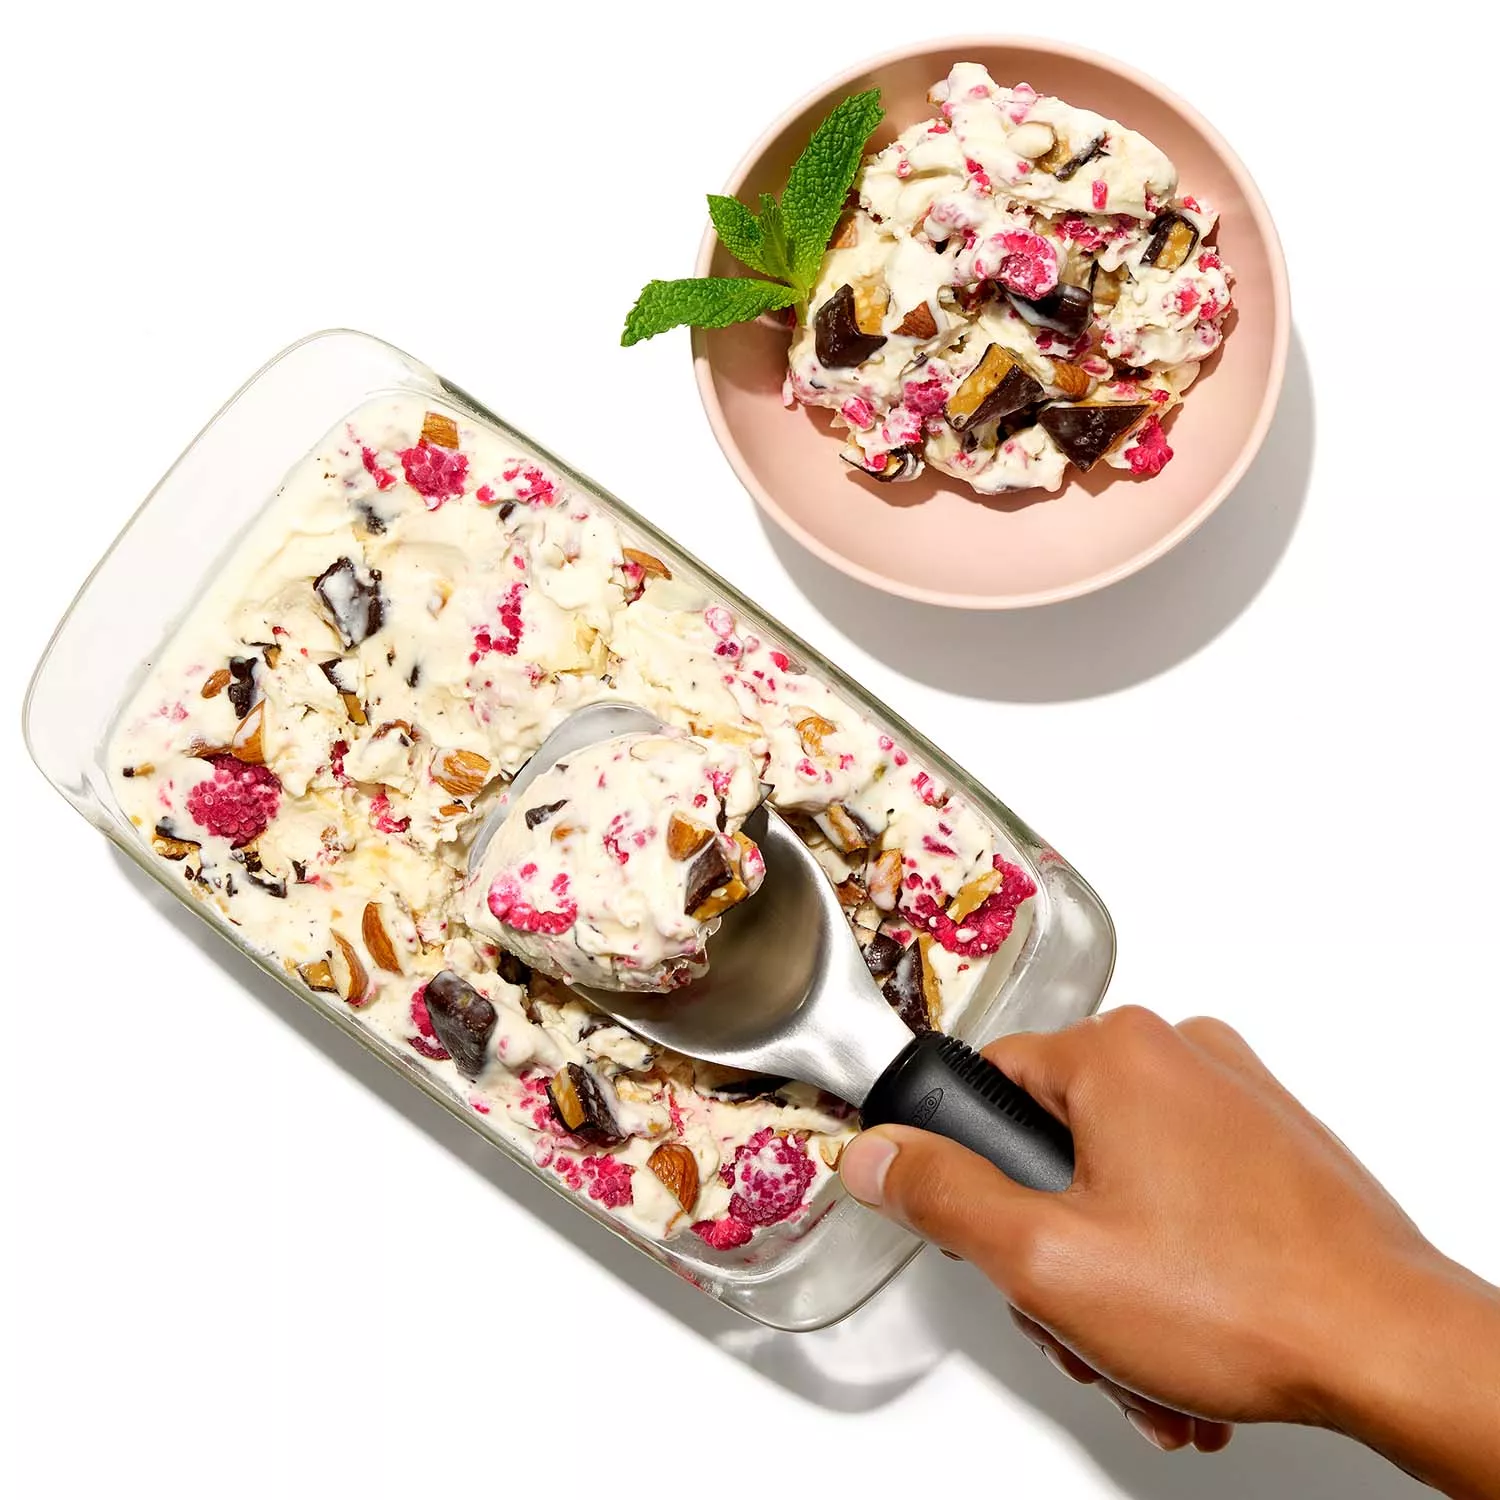 Effortlessly scoop the hardest ice cream with Wilton Incredible